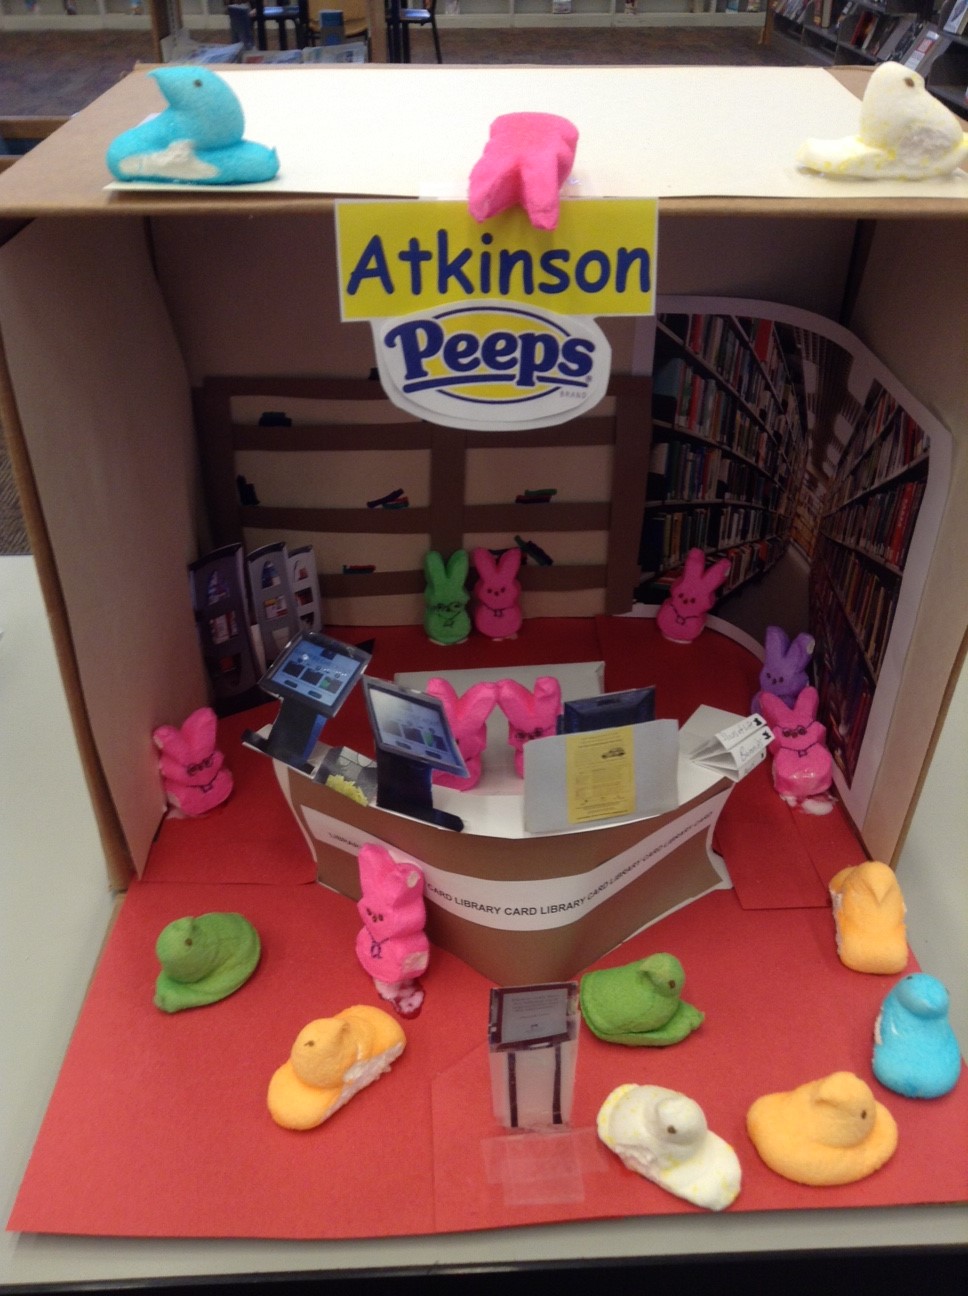 Check out our mini Peeps library!